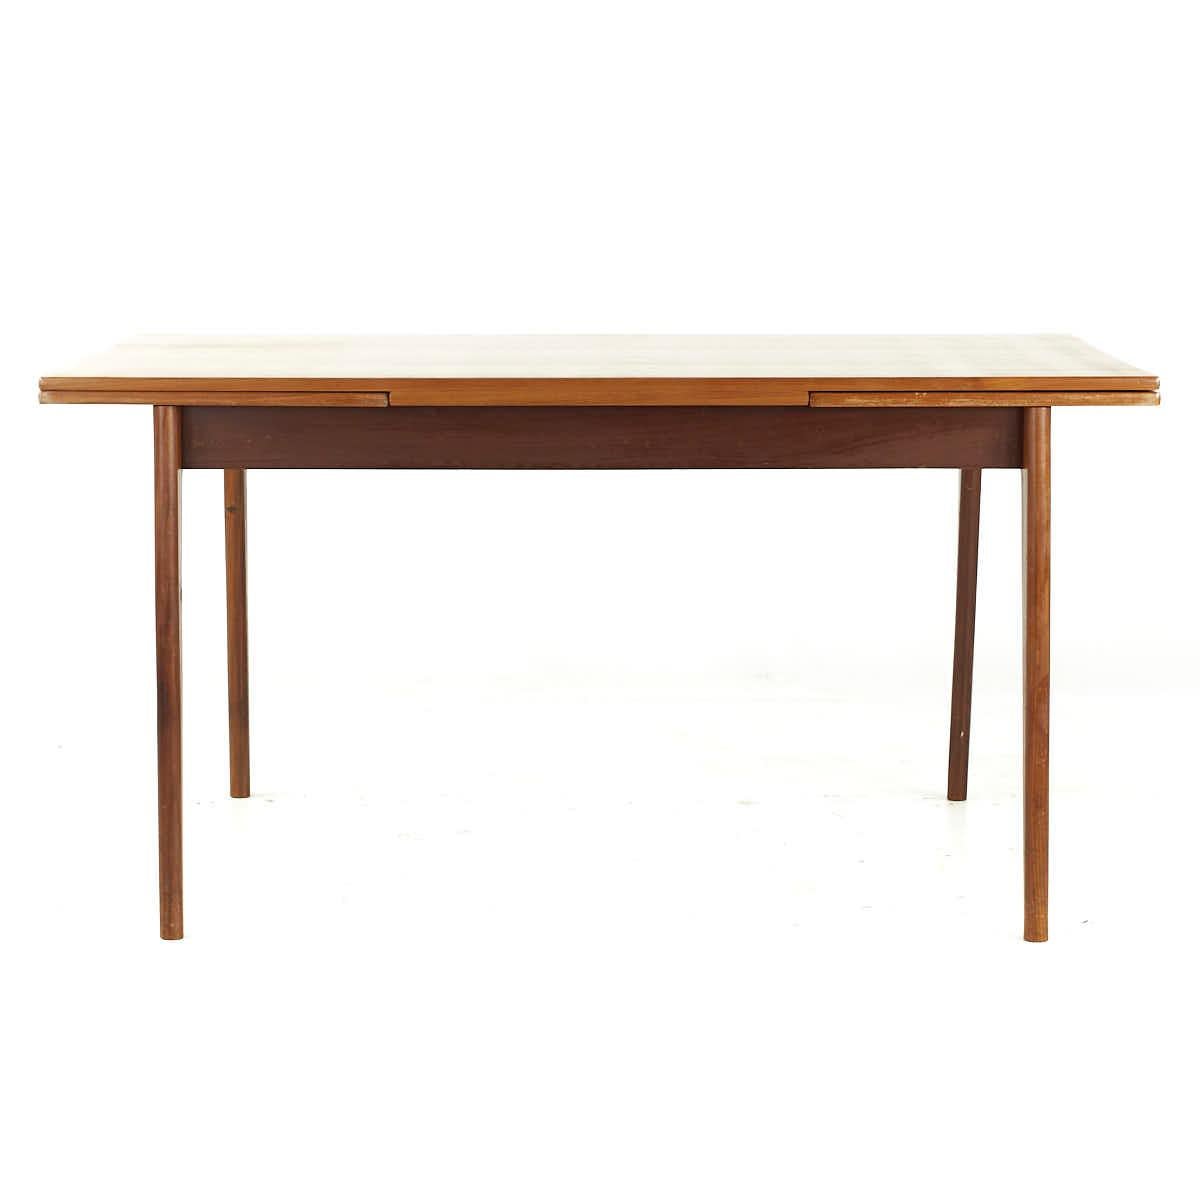 Johannes Andersen Style Mid Century Teak Hidden Leaf Dining Table

This table measures: 59 wide x 35.5 deep x 30 inches high, with a chair clearance of 24.75 inches, each leaf measures 18.5 inches wide, making a maximum table width of 96 inches when